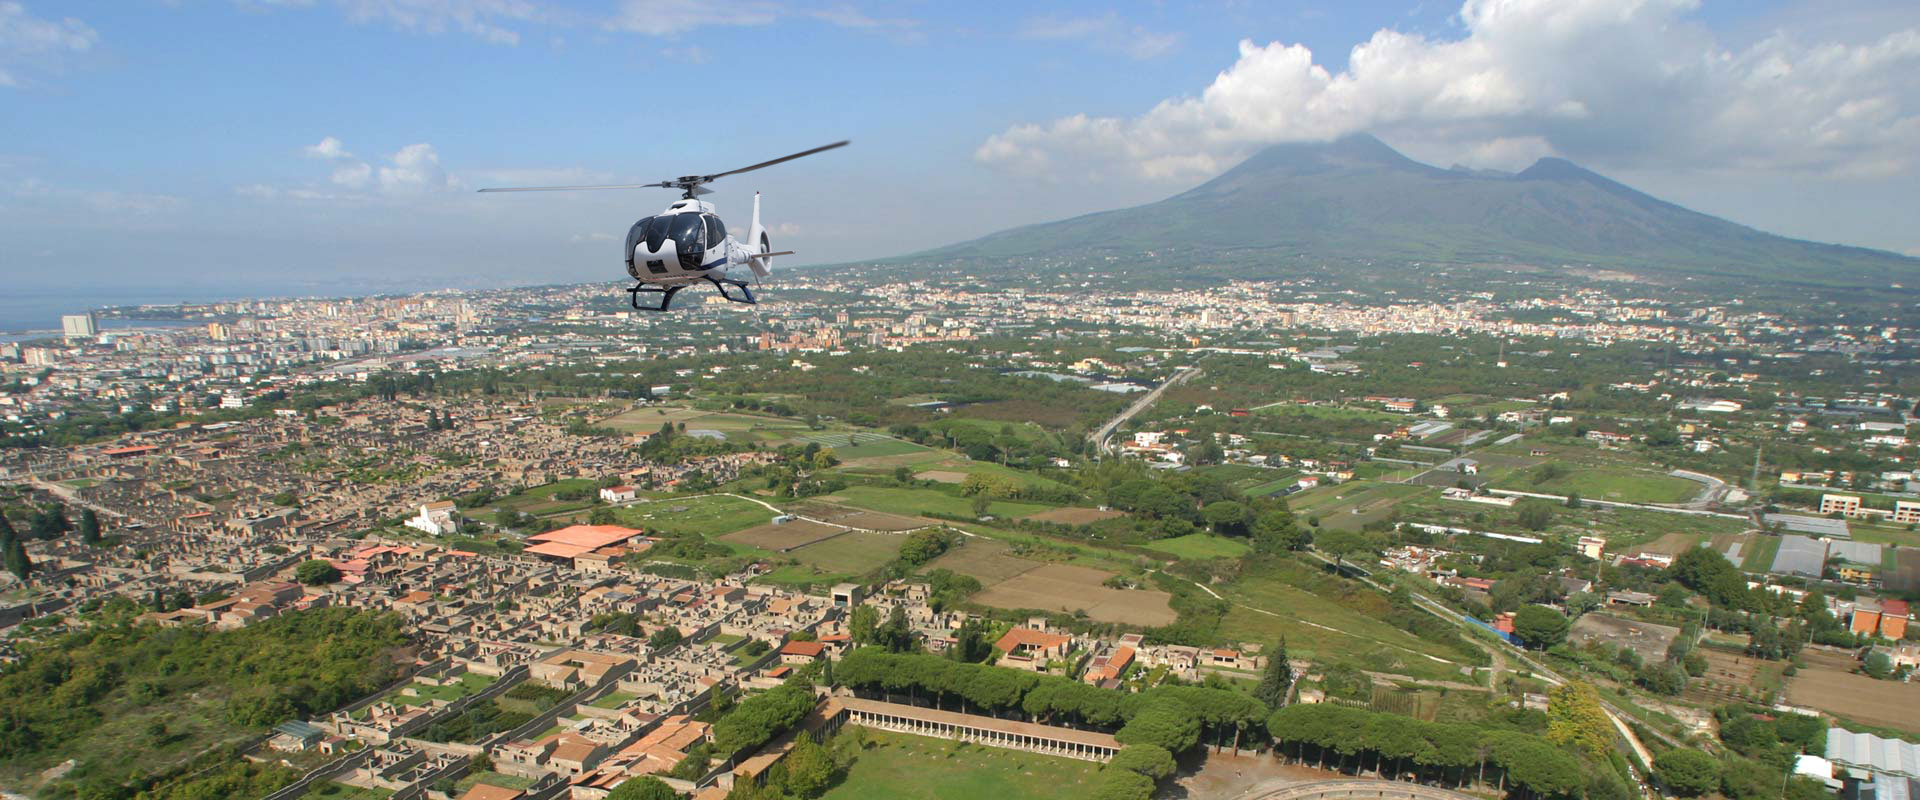 Rental Helicopters Naples